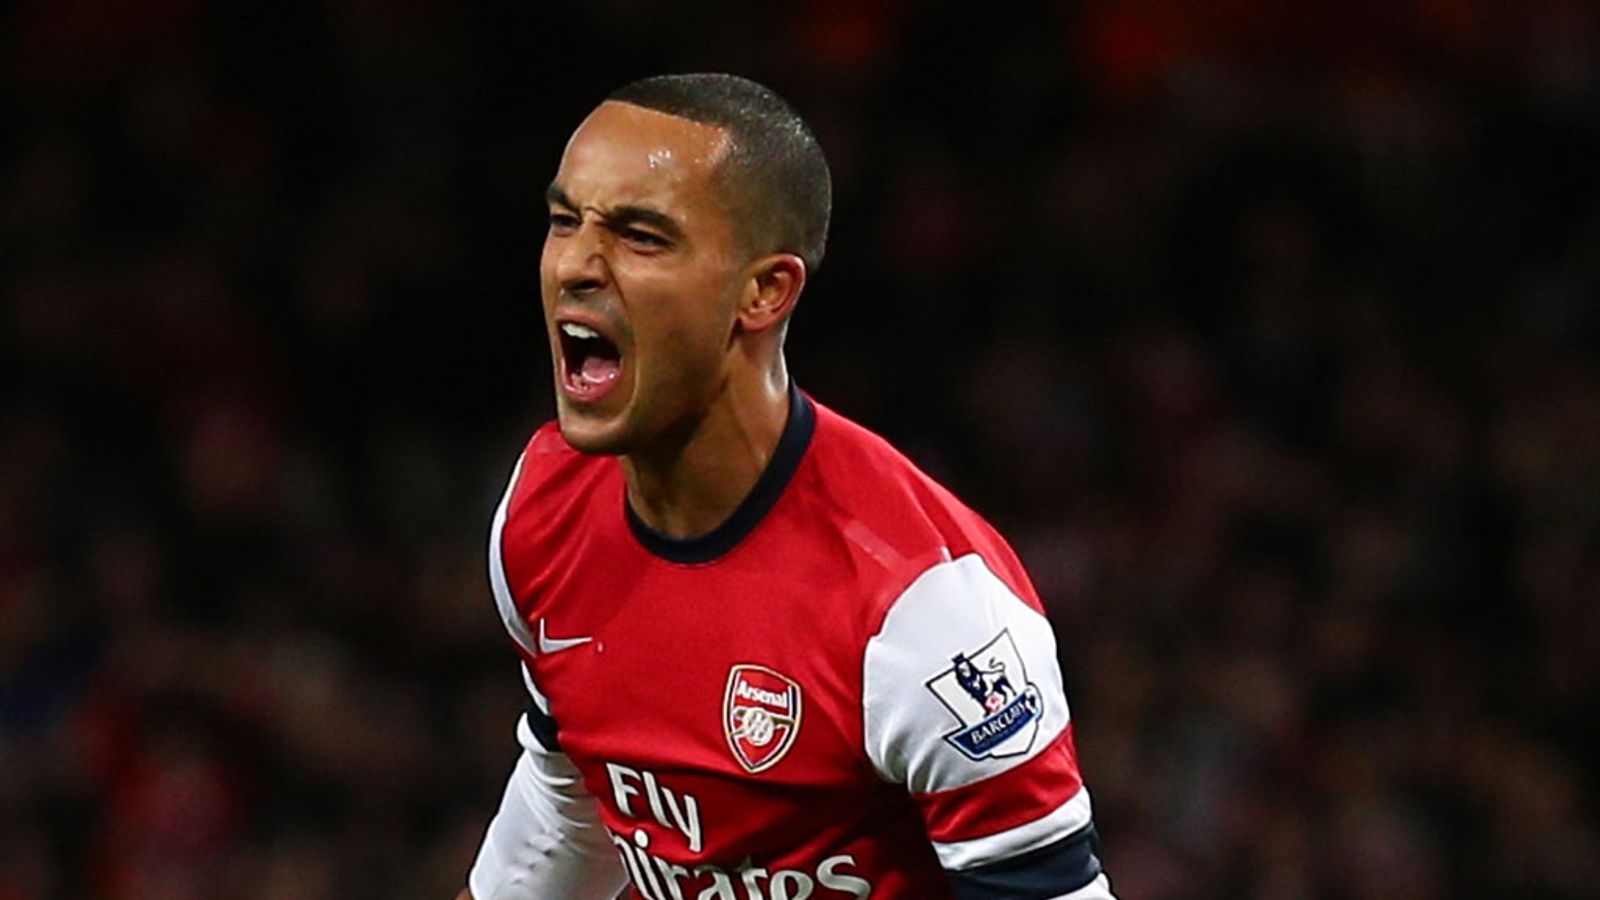 Meeting on Wednesday set to determine Theo Walcott's future at Arsenal ...